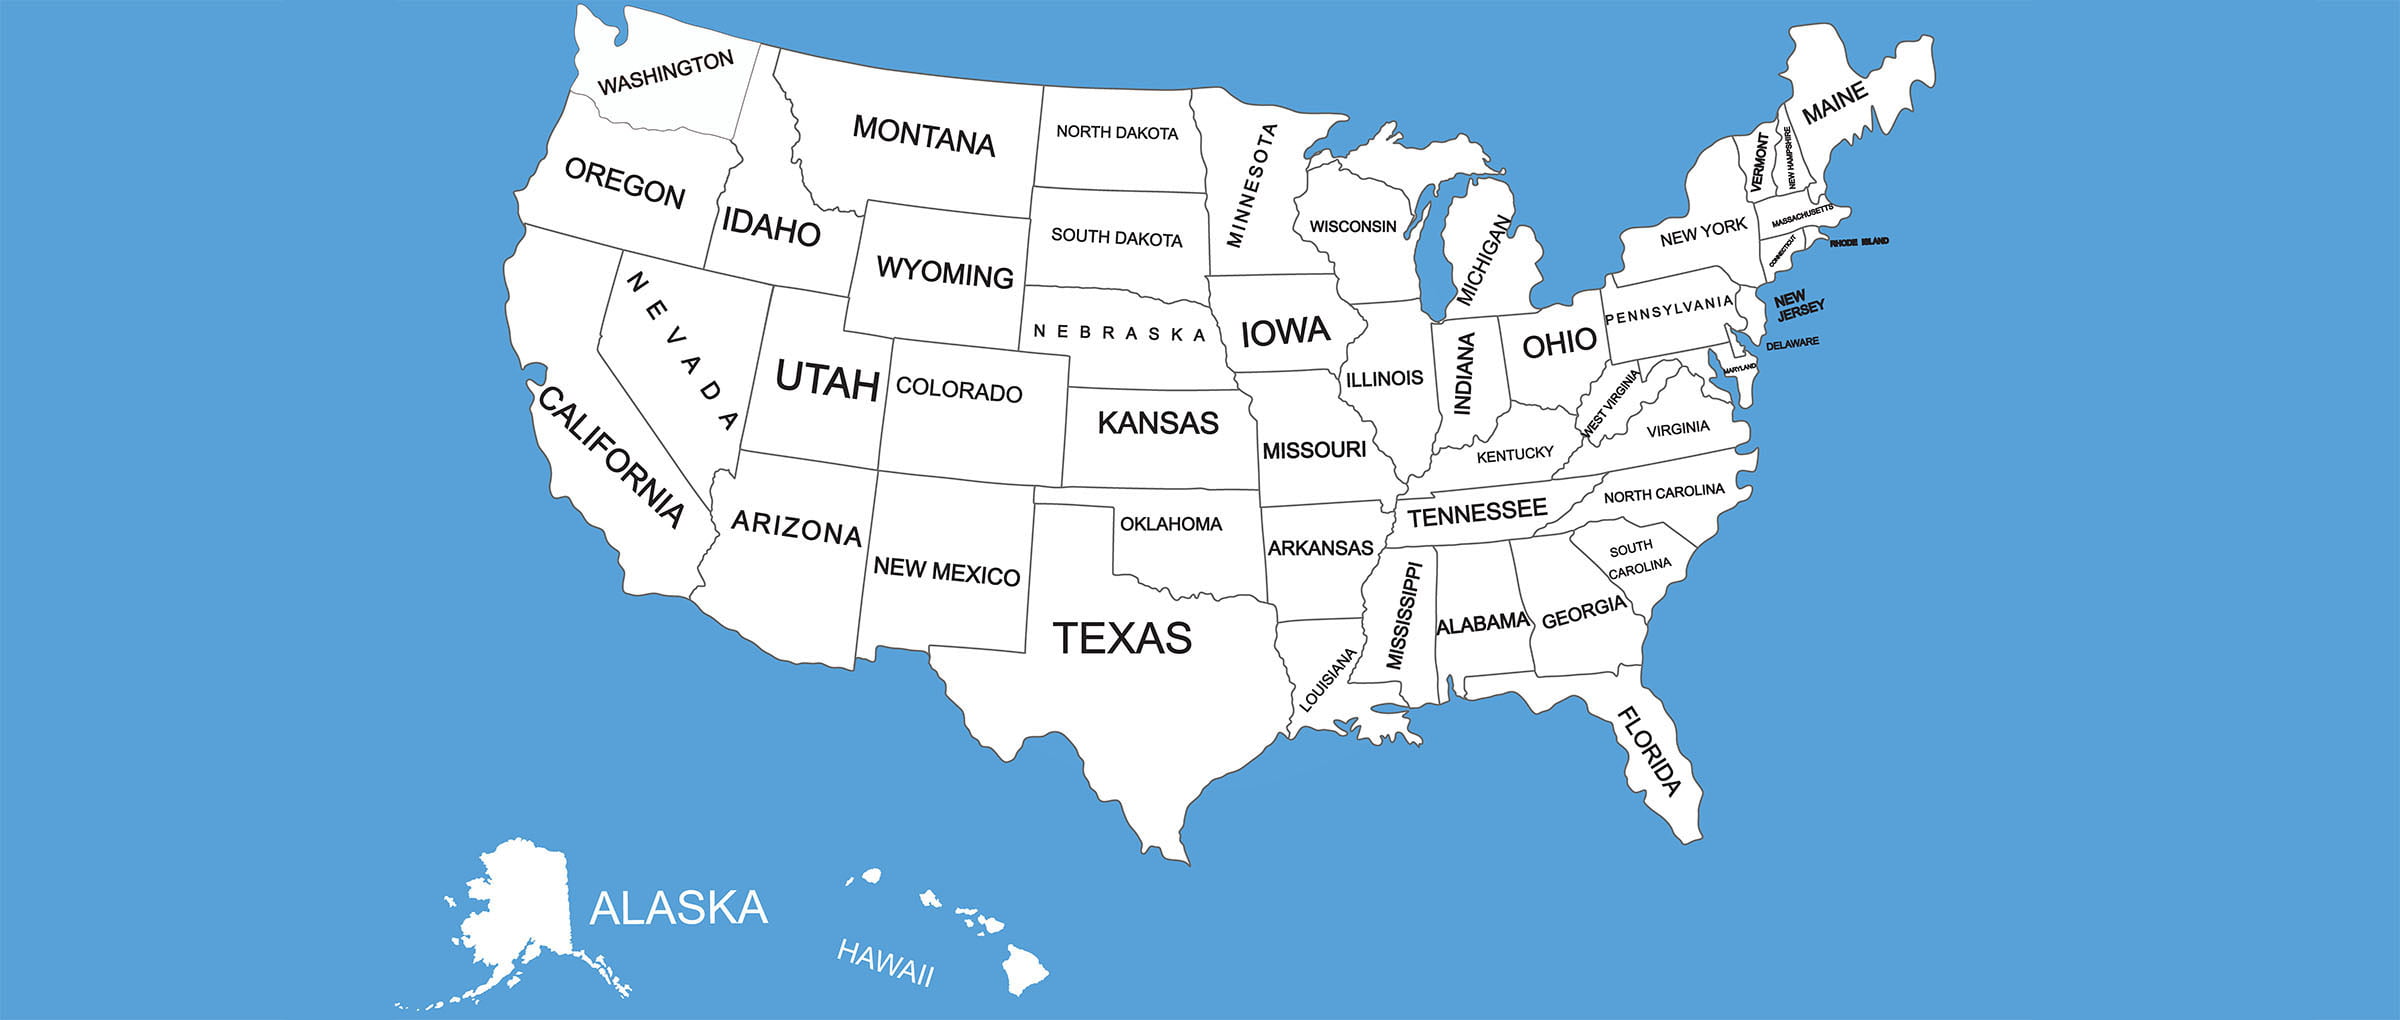 States of the US